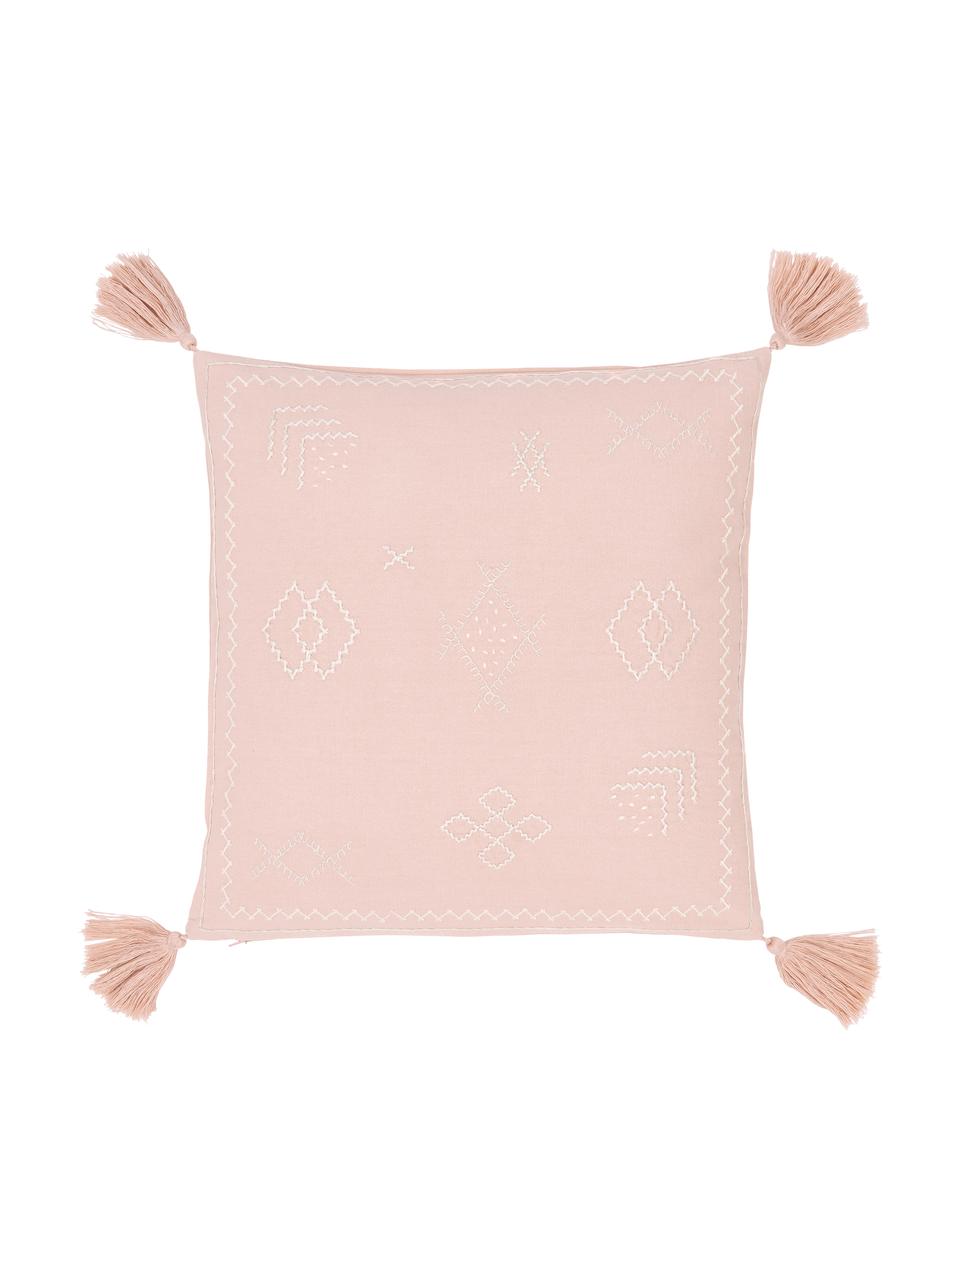 Housse de coussin ethno brodée Huata, Rose, taupe, beige